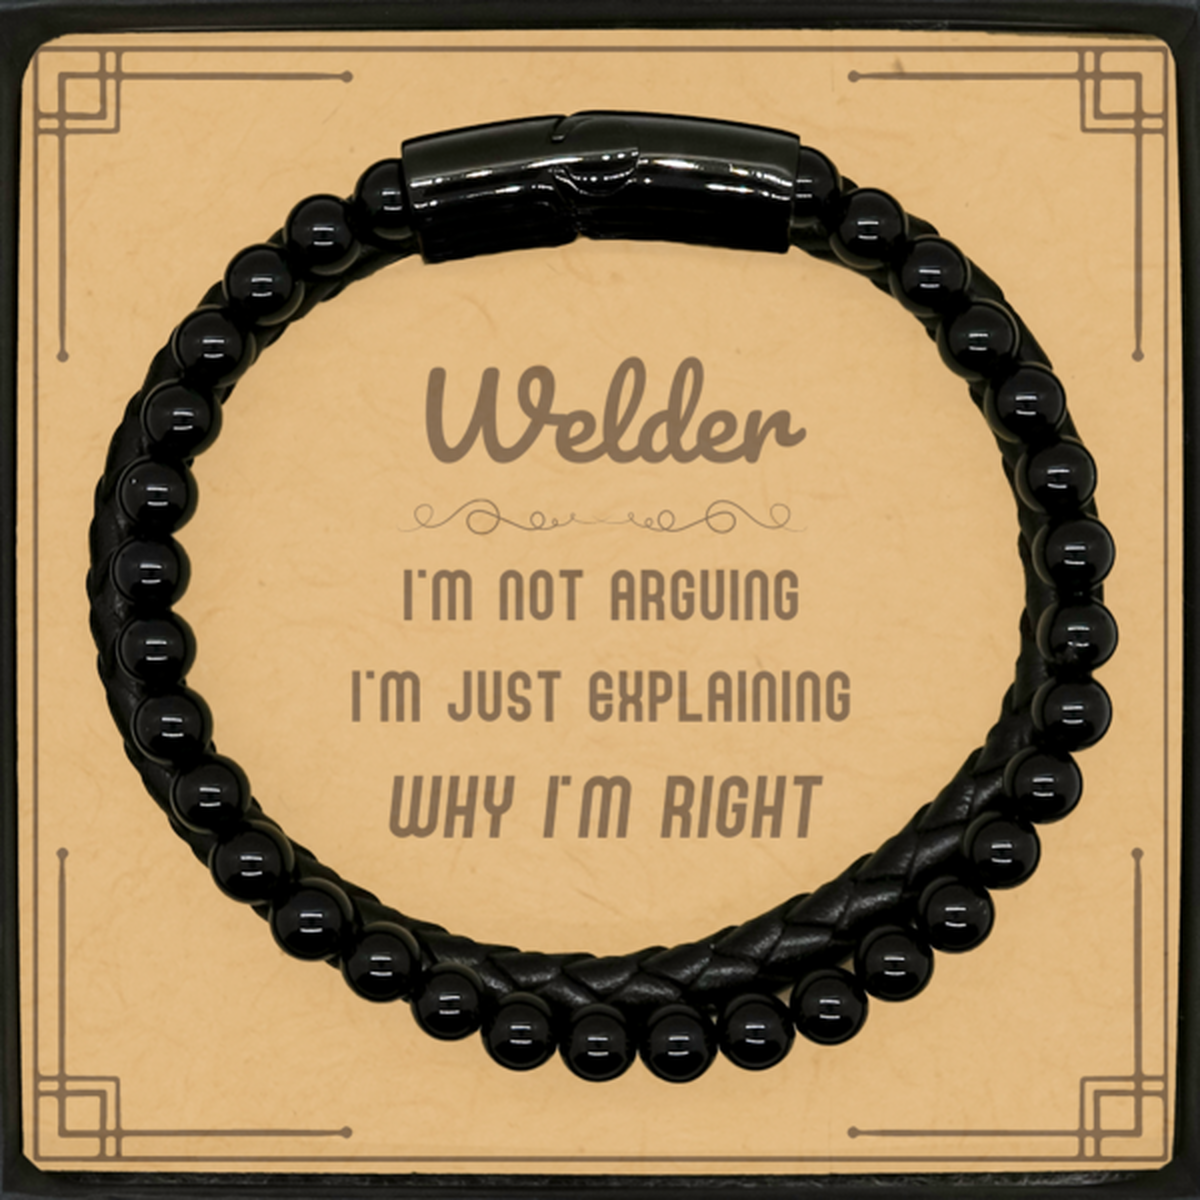 Welder I'm not Arguing. I'm Just Explaining Why I'm RIGHT Stone Leather Bracelets, Funny Saying Quote Welder Gifts For Welder Message Card Graduation Birthday Christmas Gifts for Men Women Coworker